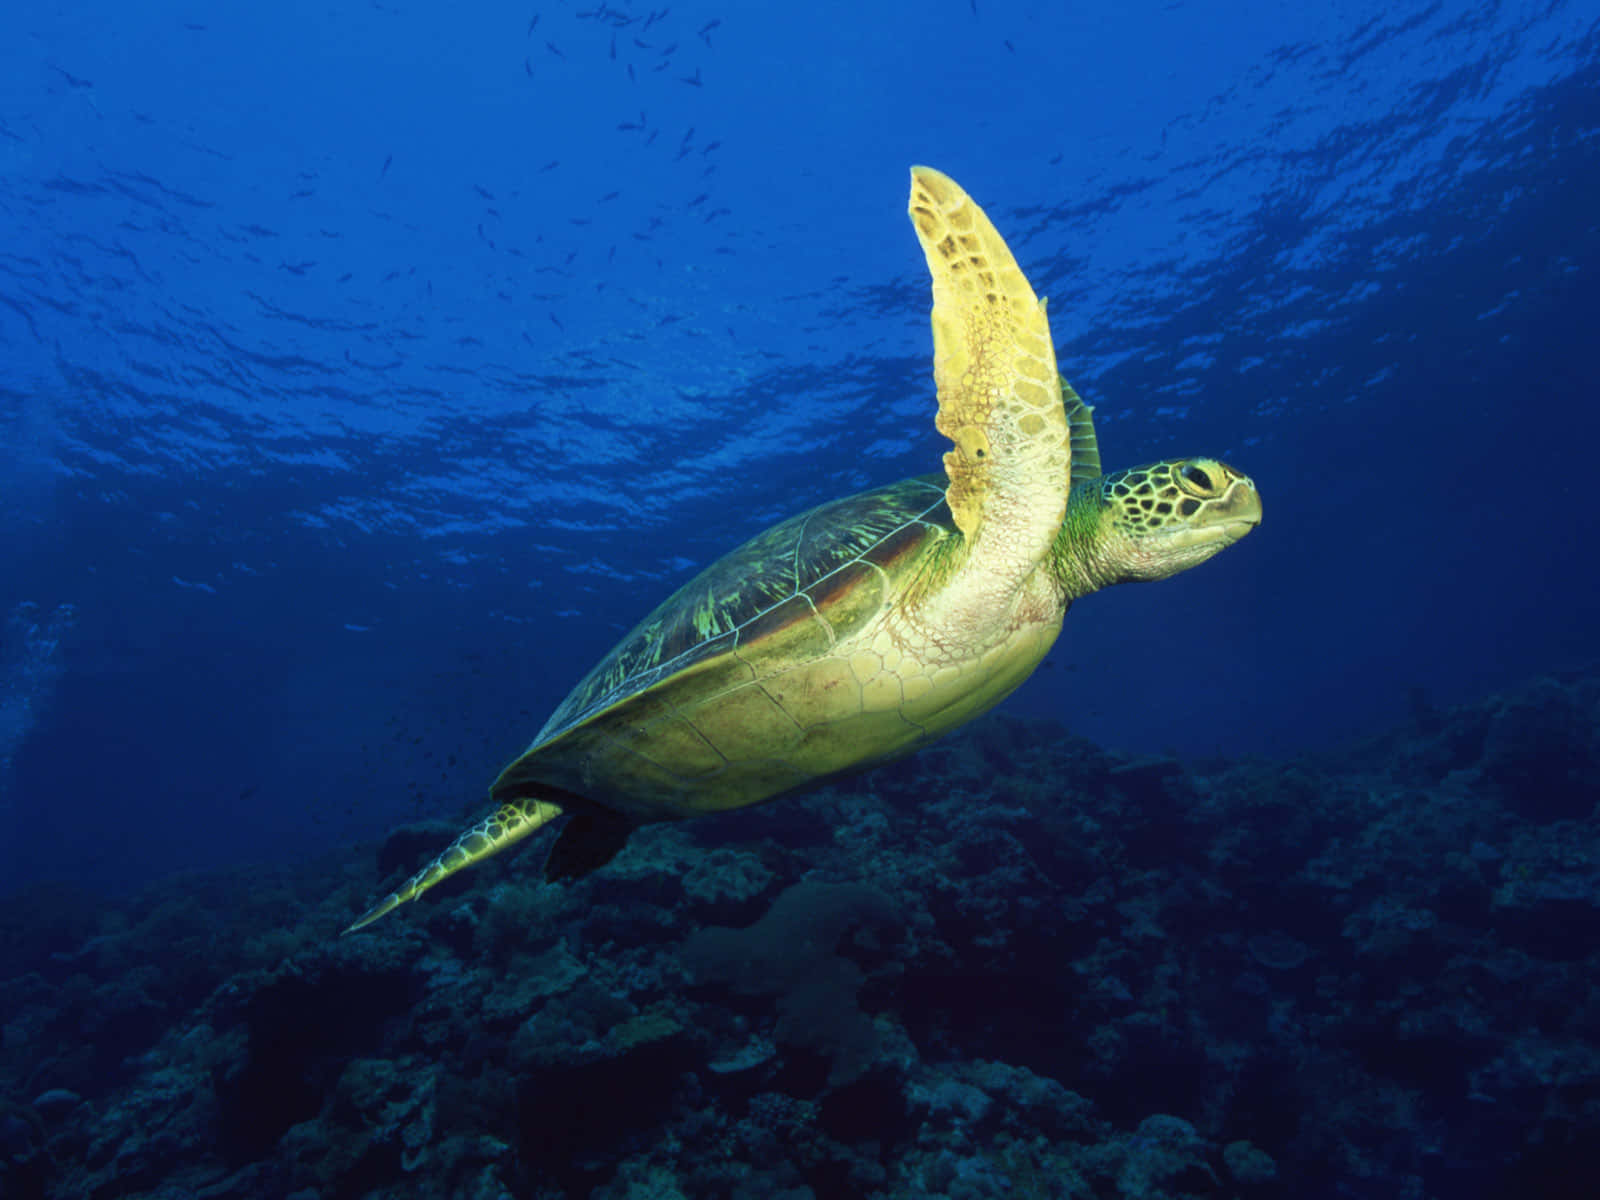 Under the Sea View with a Turtle Wallpaper